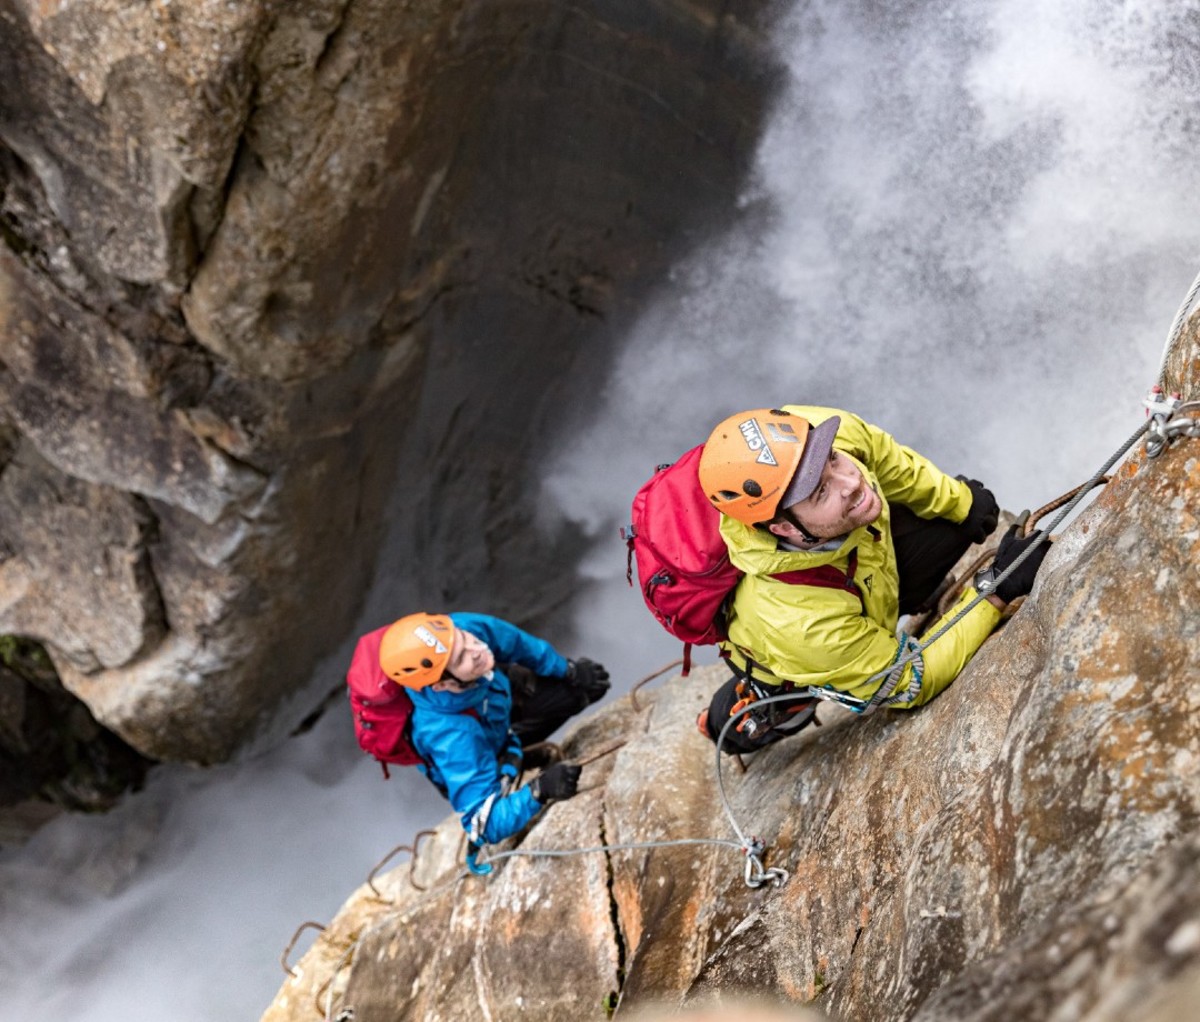 Two climbers ascending a Via Ferrata cliff in the Cariboo Mountains